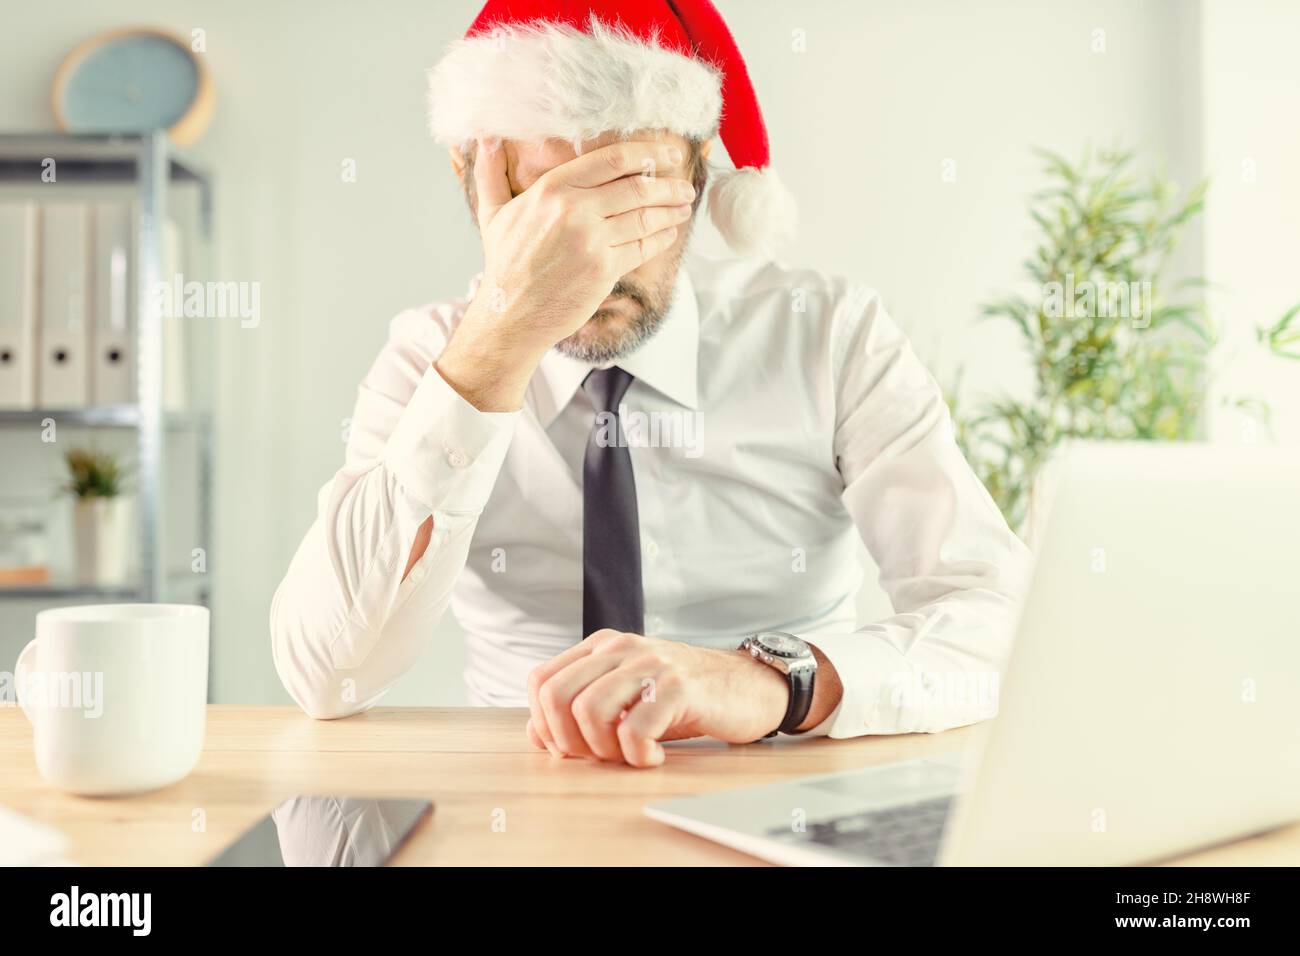 New Year depression, businessman in office wearing Santa Claus hat feeling lonely and depressed with hand covering face, selective focus Stock Photo